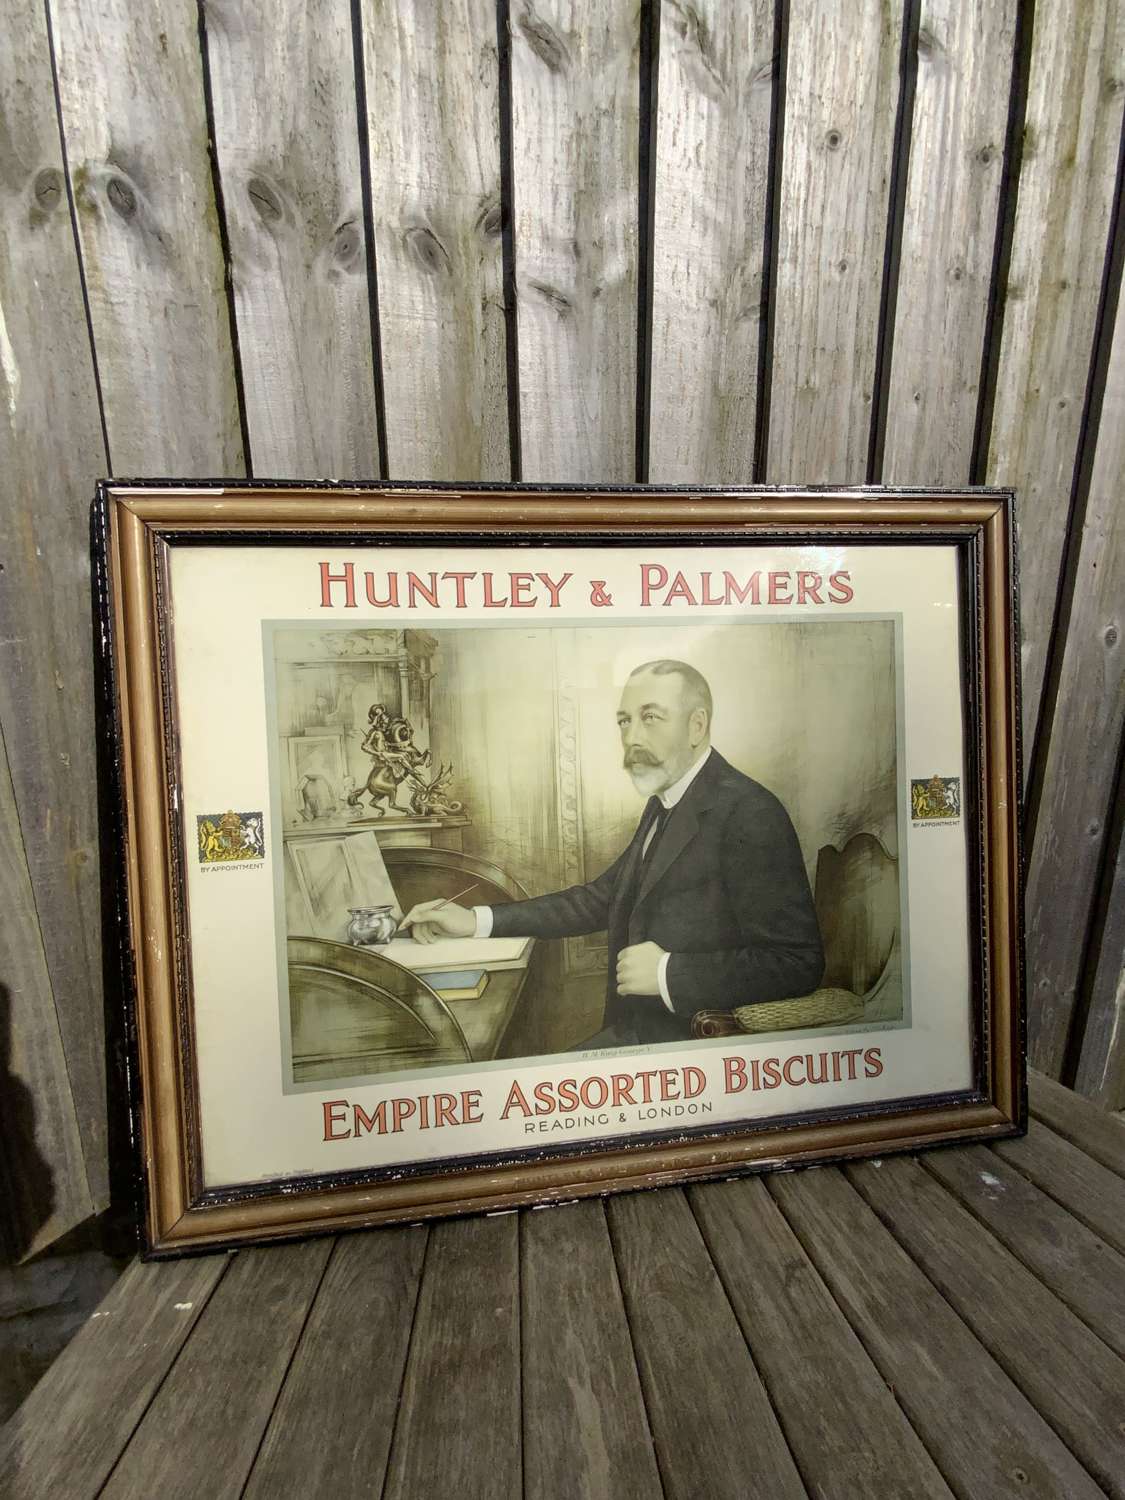 Large Huntley and palmers advertising showcard.